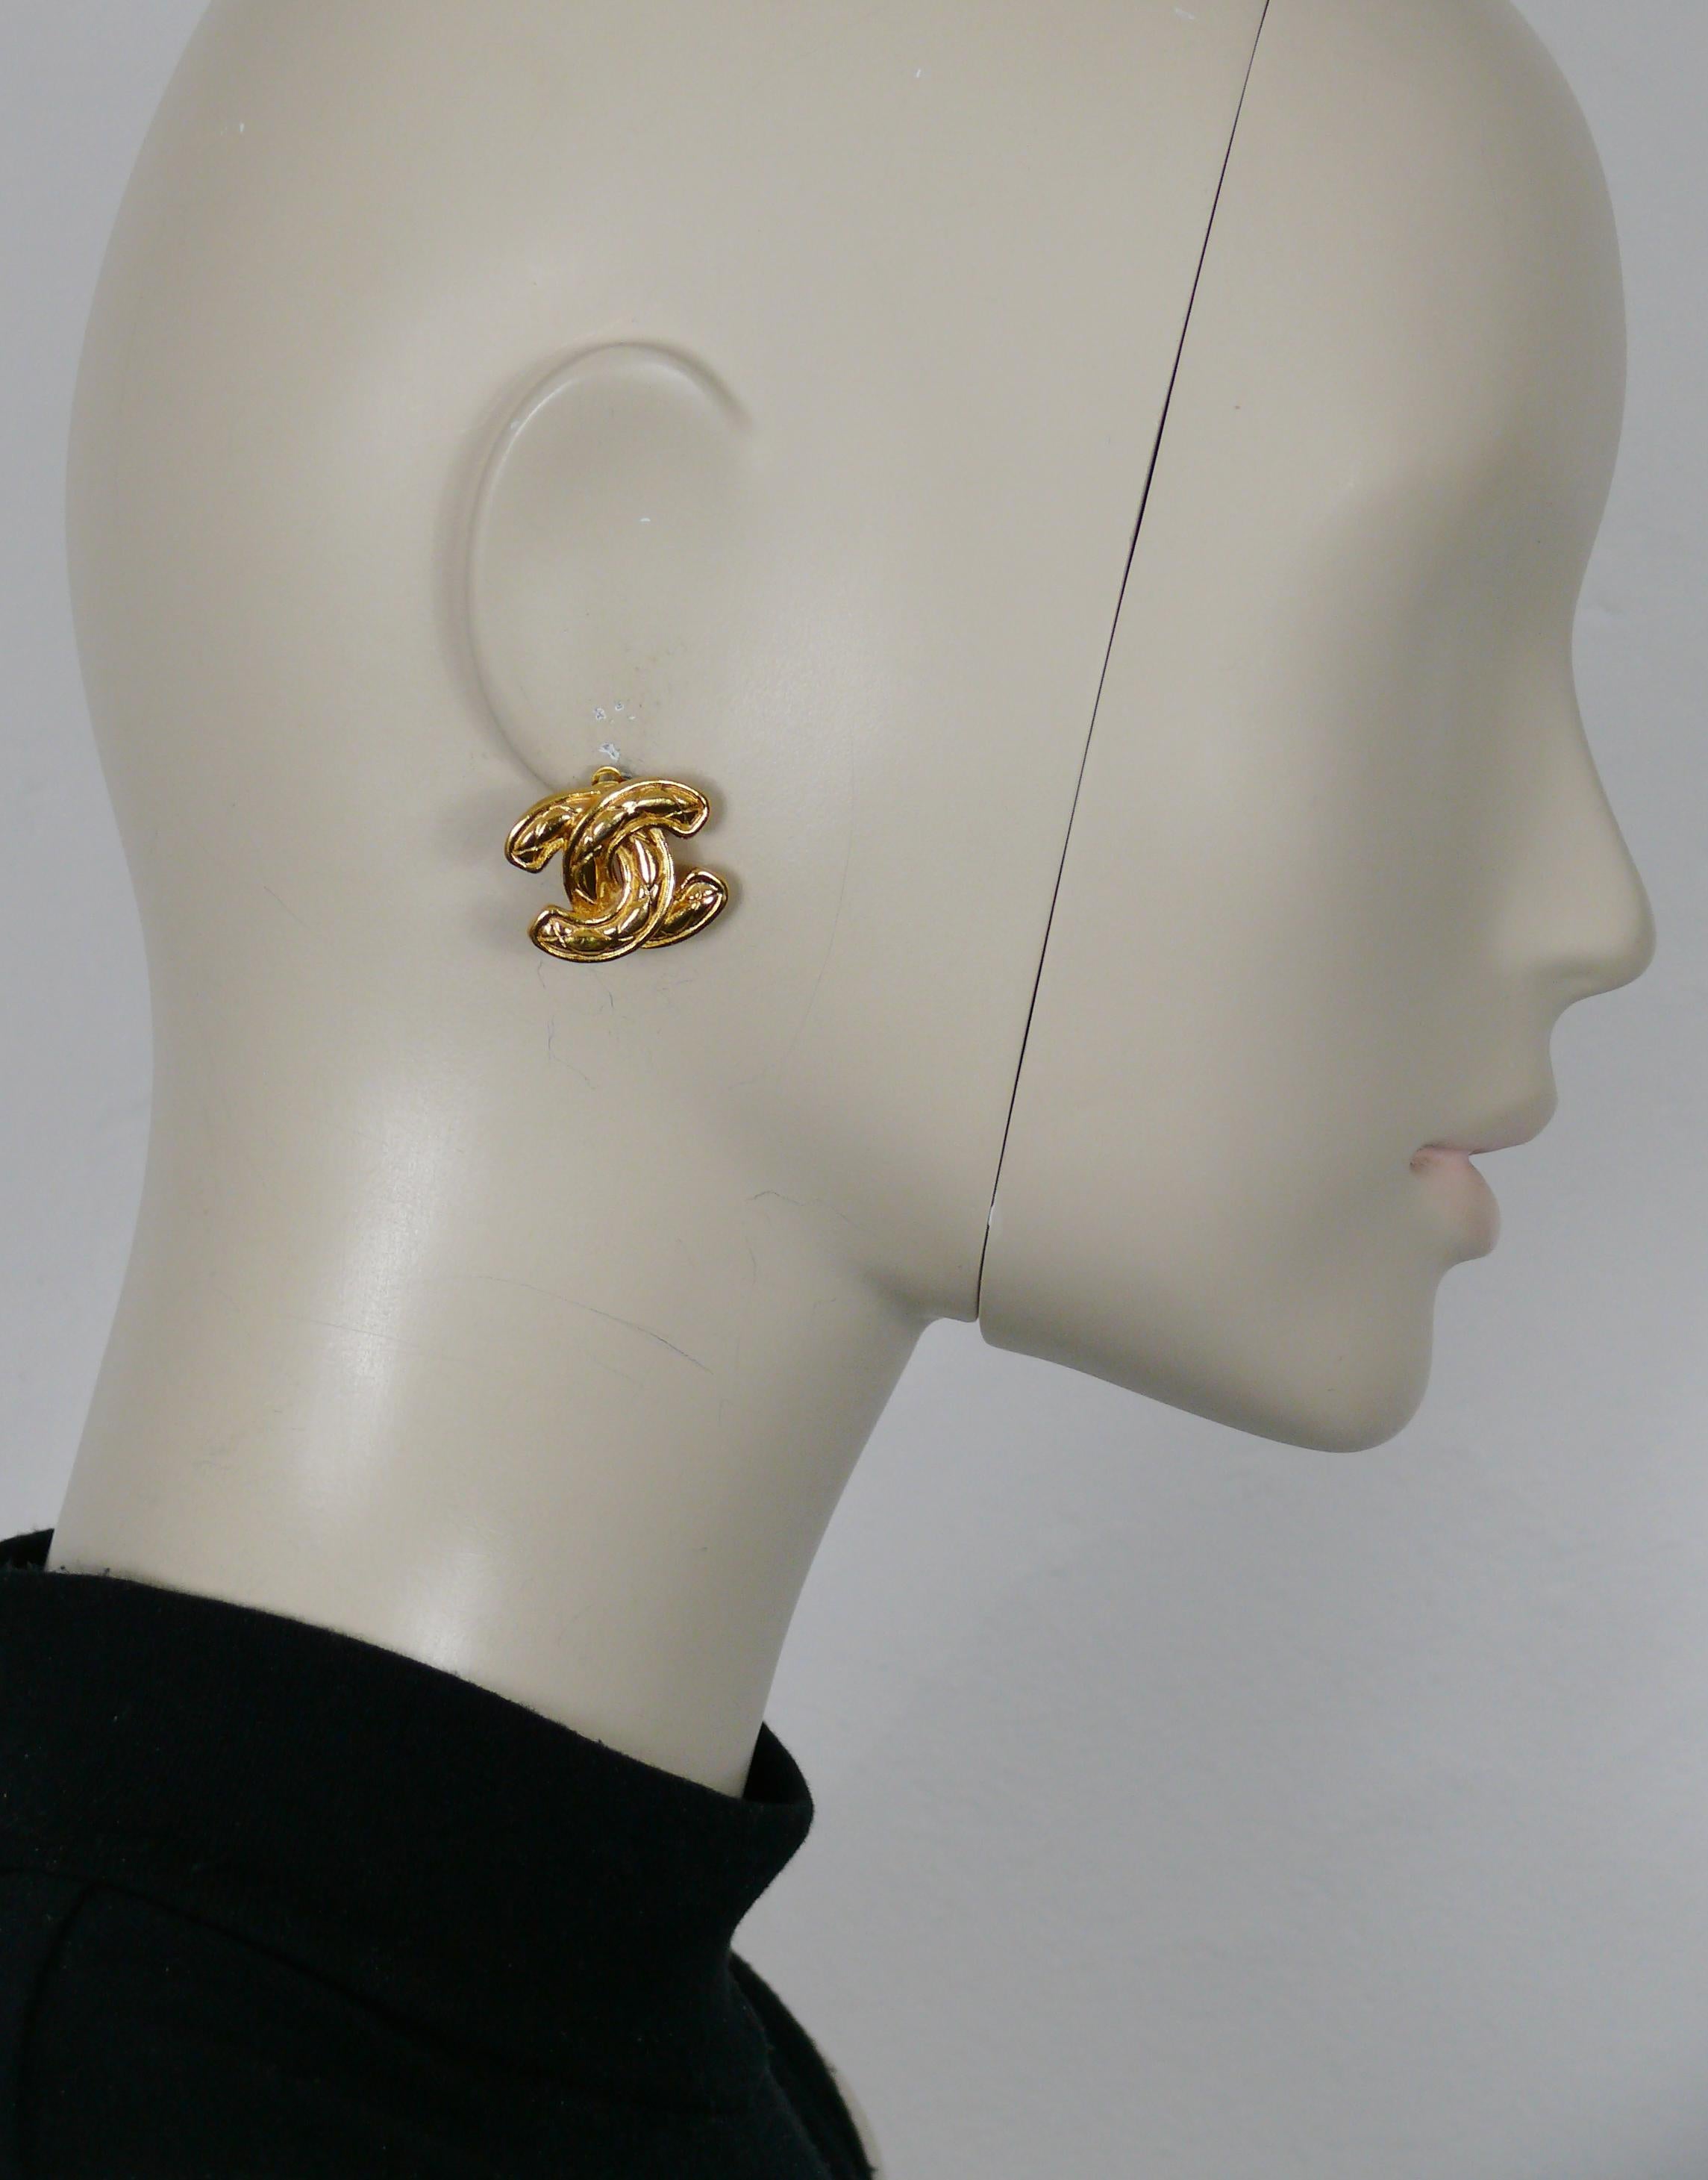 CHANEL vintage iconic gold tone quilted matelasse CC logo clip-on earrings.

Embossed © CHANEL and model reference number 2433

Indicative measurements : width approx. 2.4 cm (0.94 inch) / height approx. 2 cm (0.79 inch).

Material : Gold tone metal